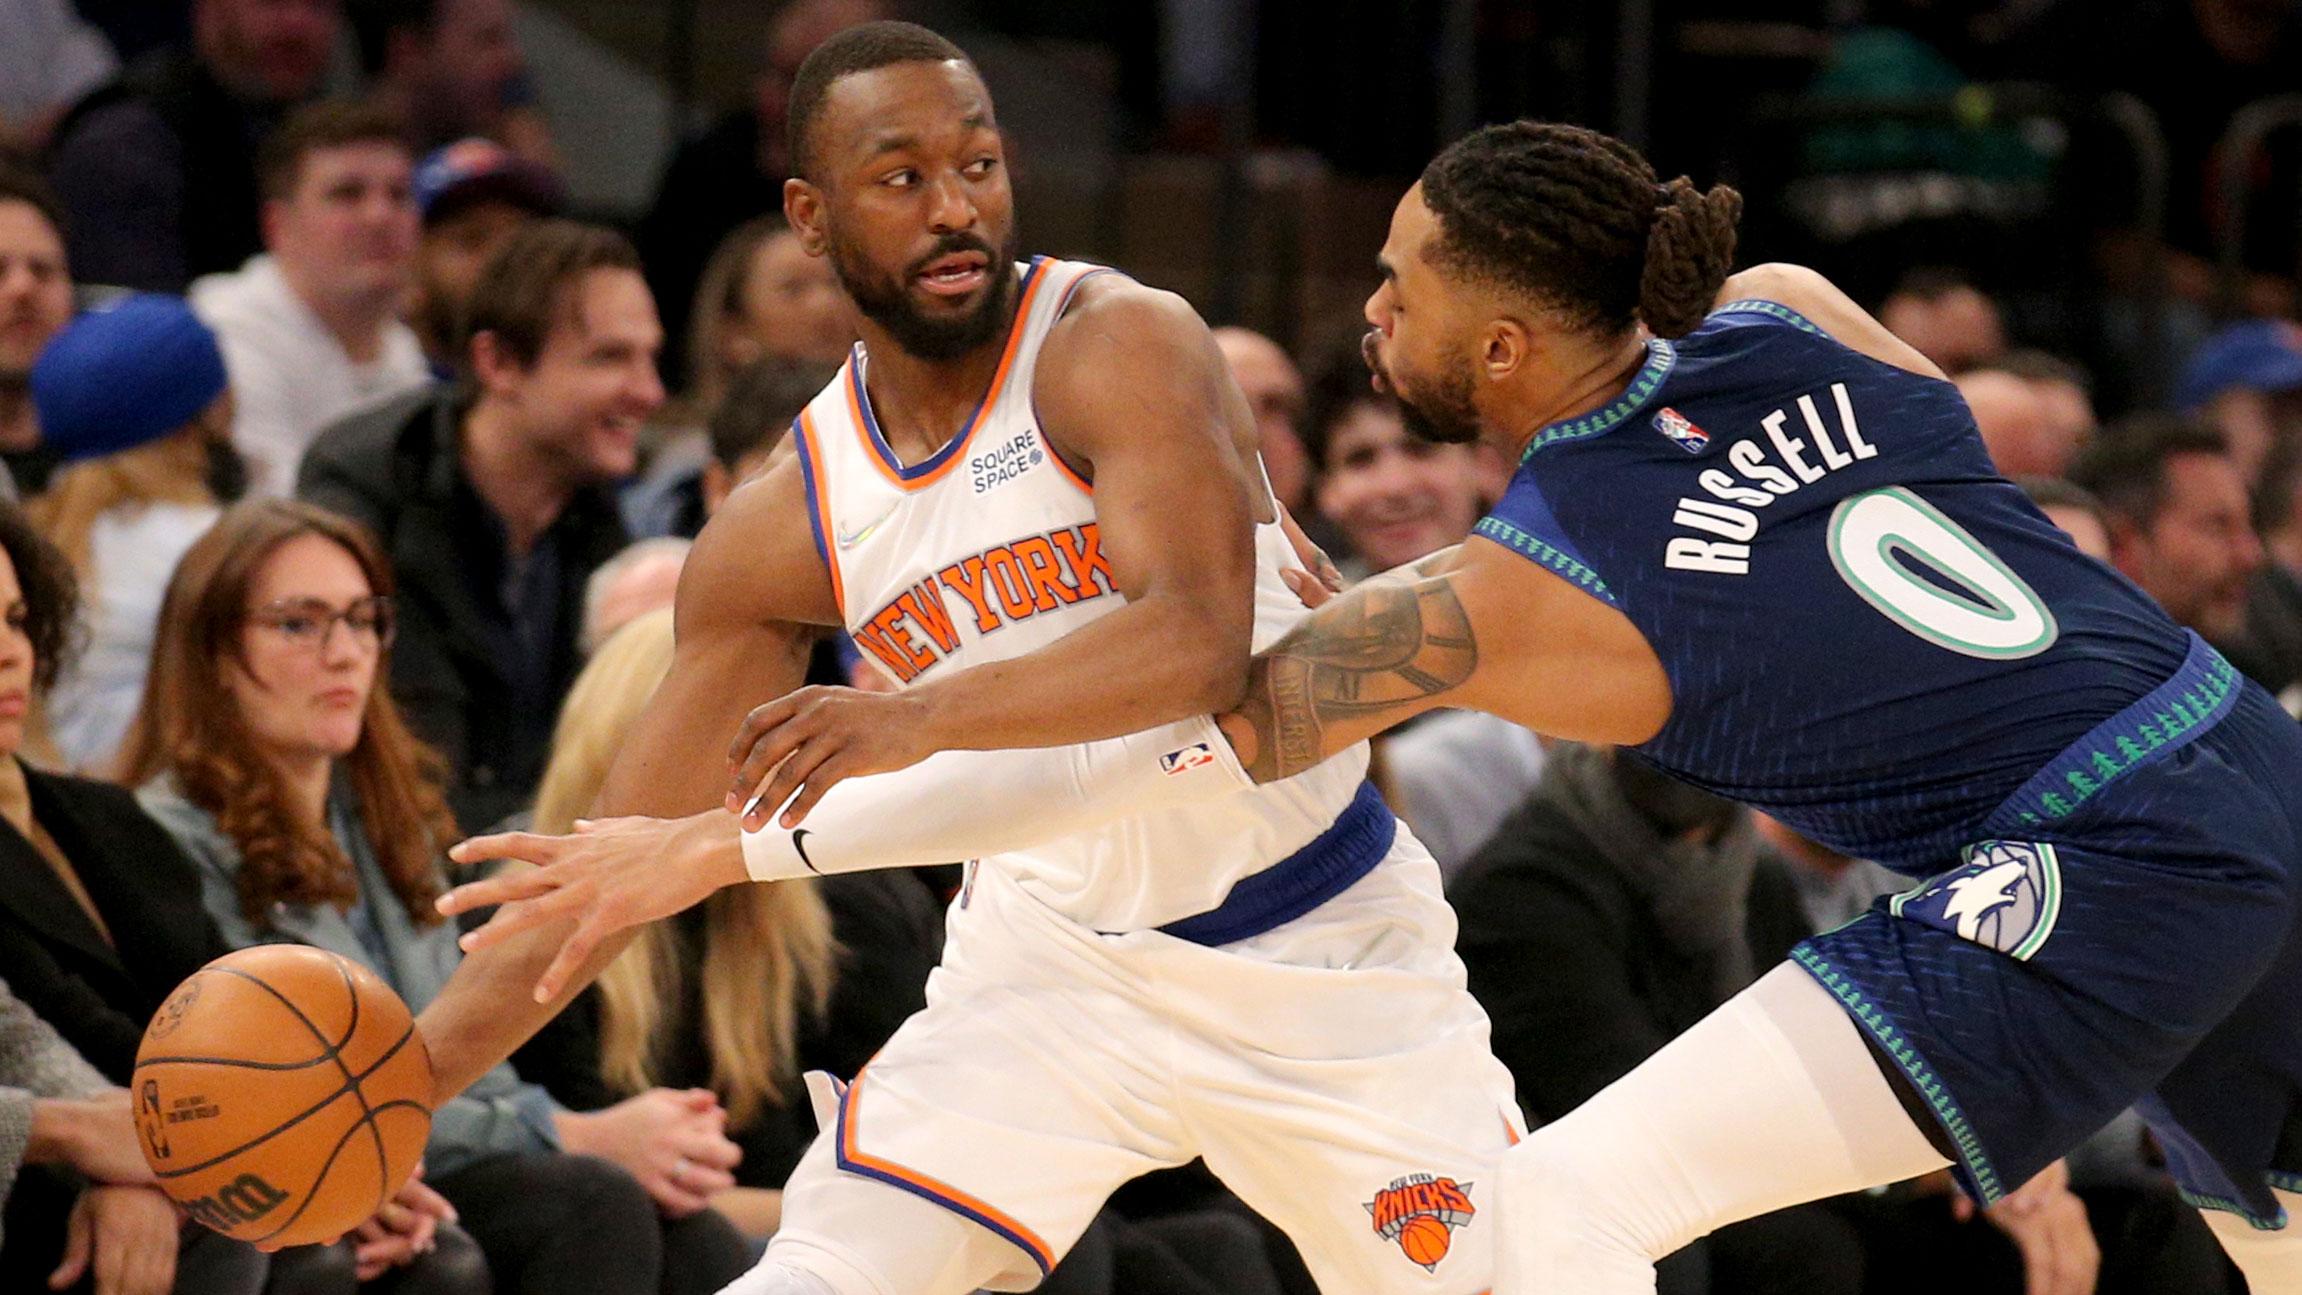 Jan 18, 2022; New York, New York, USA; New York Knicks guard Kemba Walker (8) controls the ball against Minnesota Timberwolves guard D'Angelo Russell (0) and forward Jarred Vanderbilt (8) during the first quarter at Madison Square Garden. / Brad Penner-USA TODAY Sports